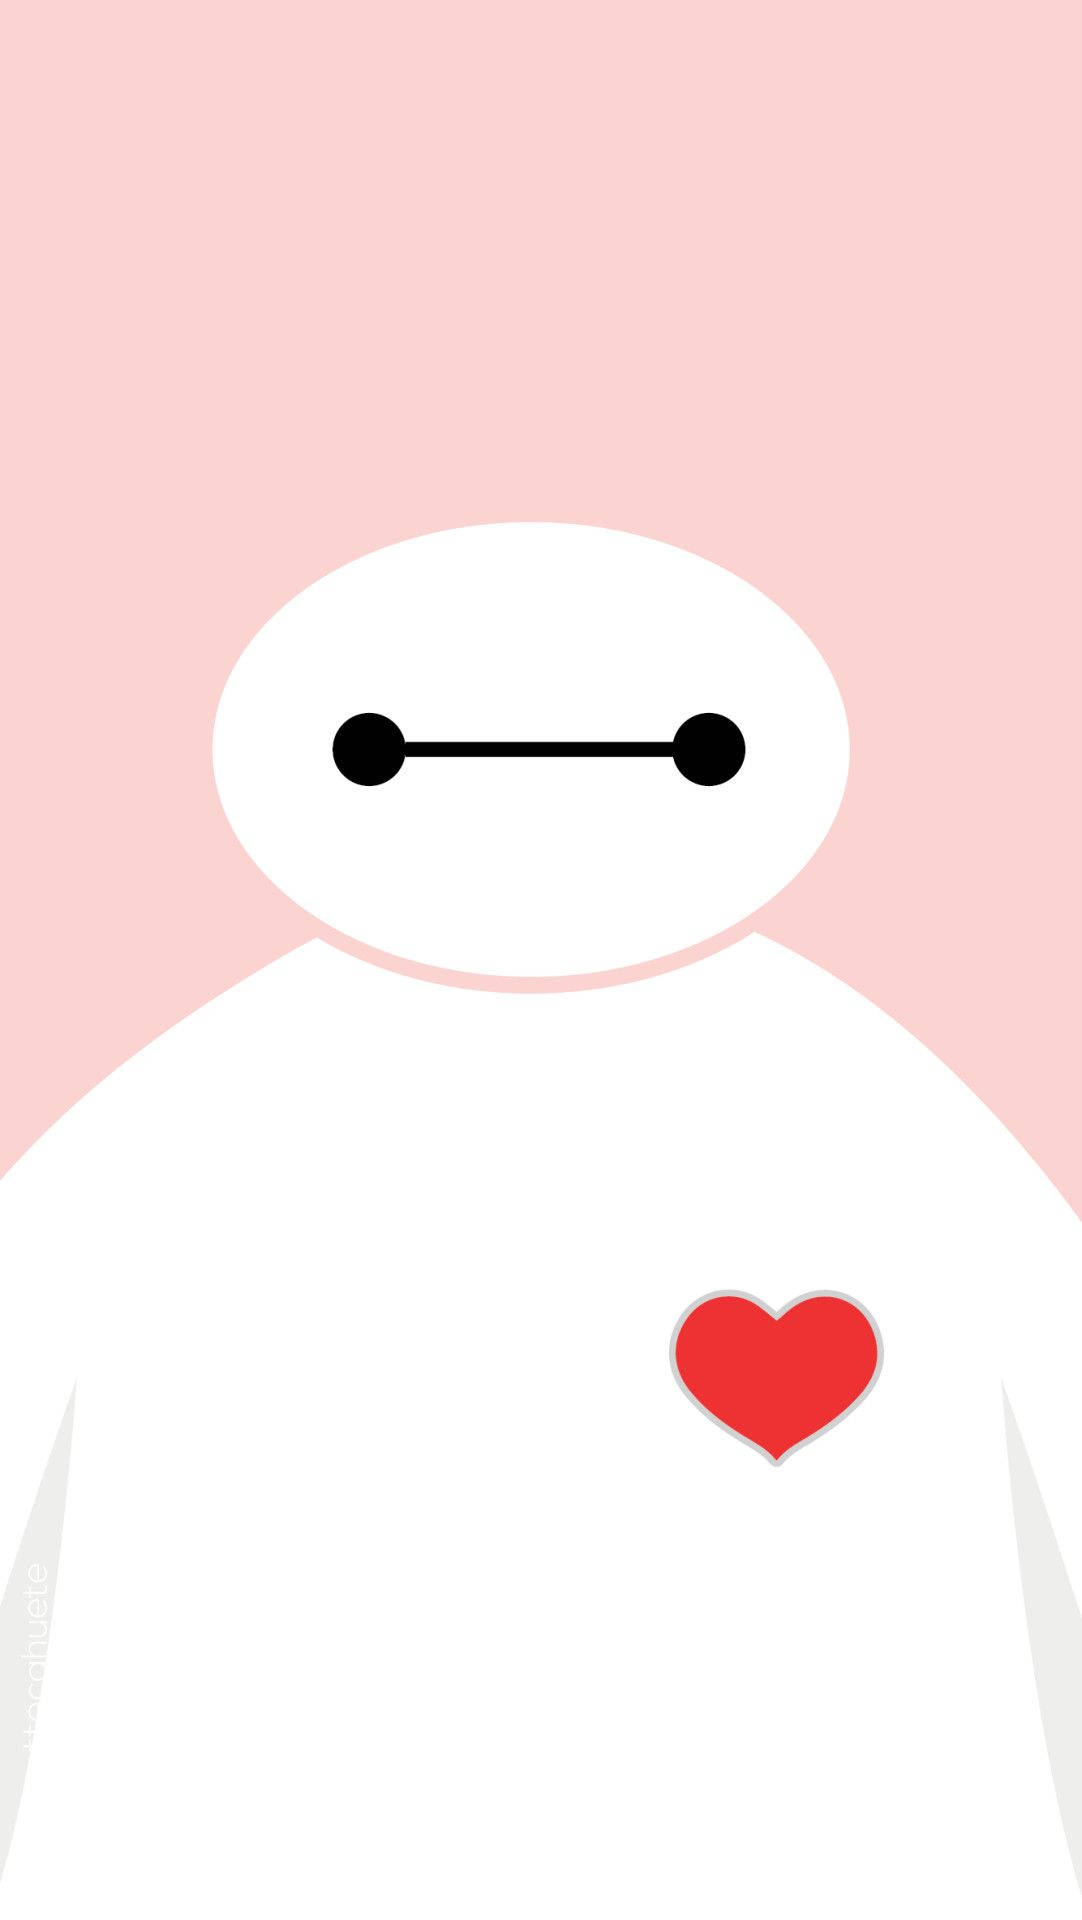 Cute Baymax with a plain red heart on his chest wallpaper.